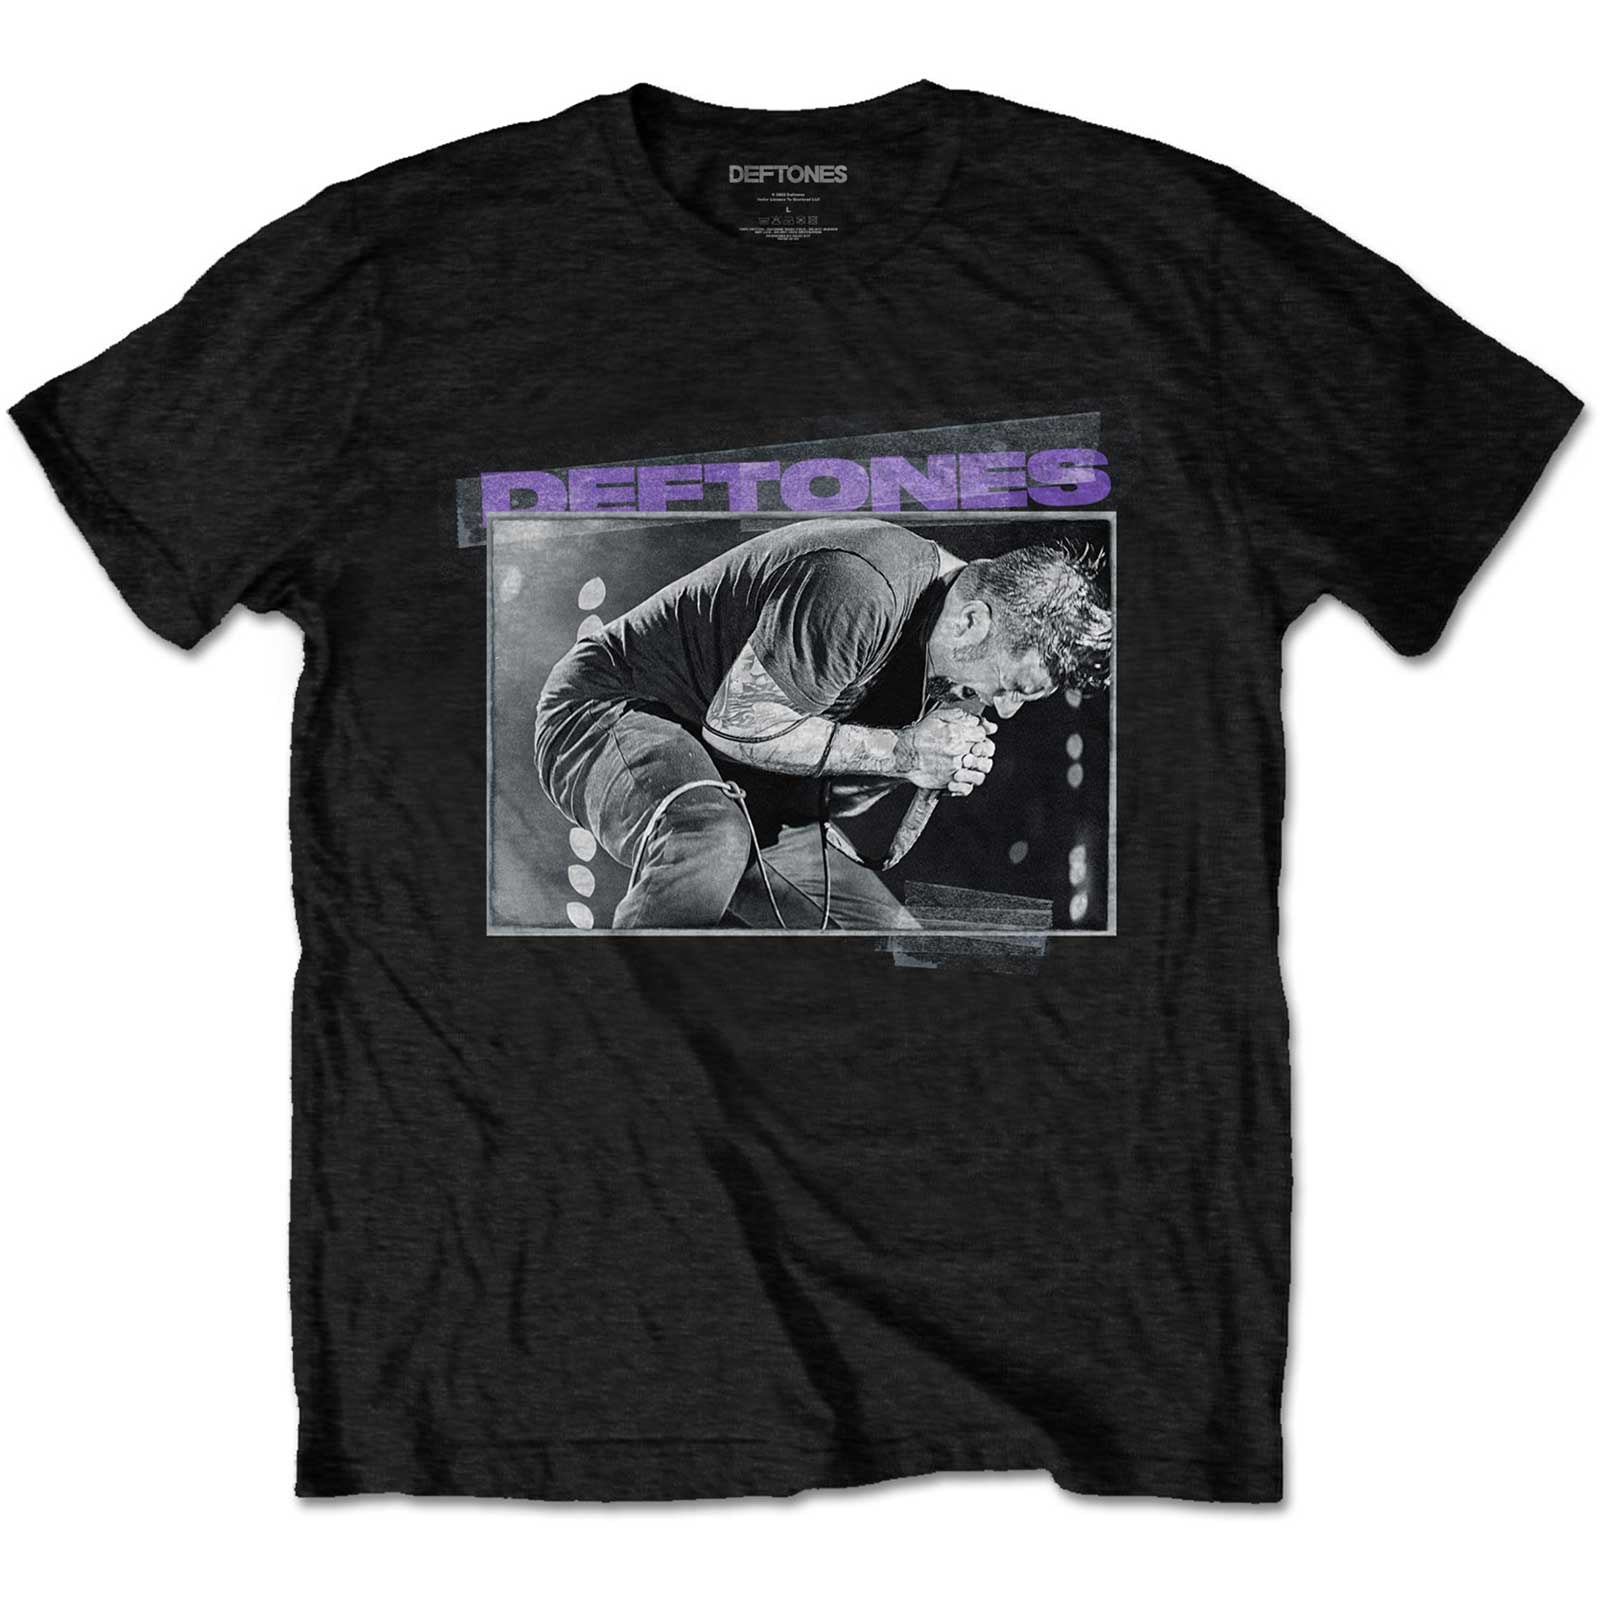 Black DEFTONES T-shirt featuring a live photo of vocalist Chino Moreno